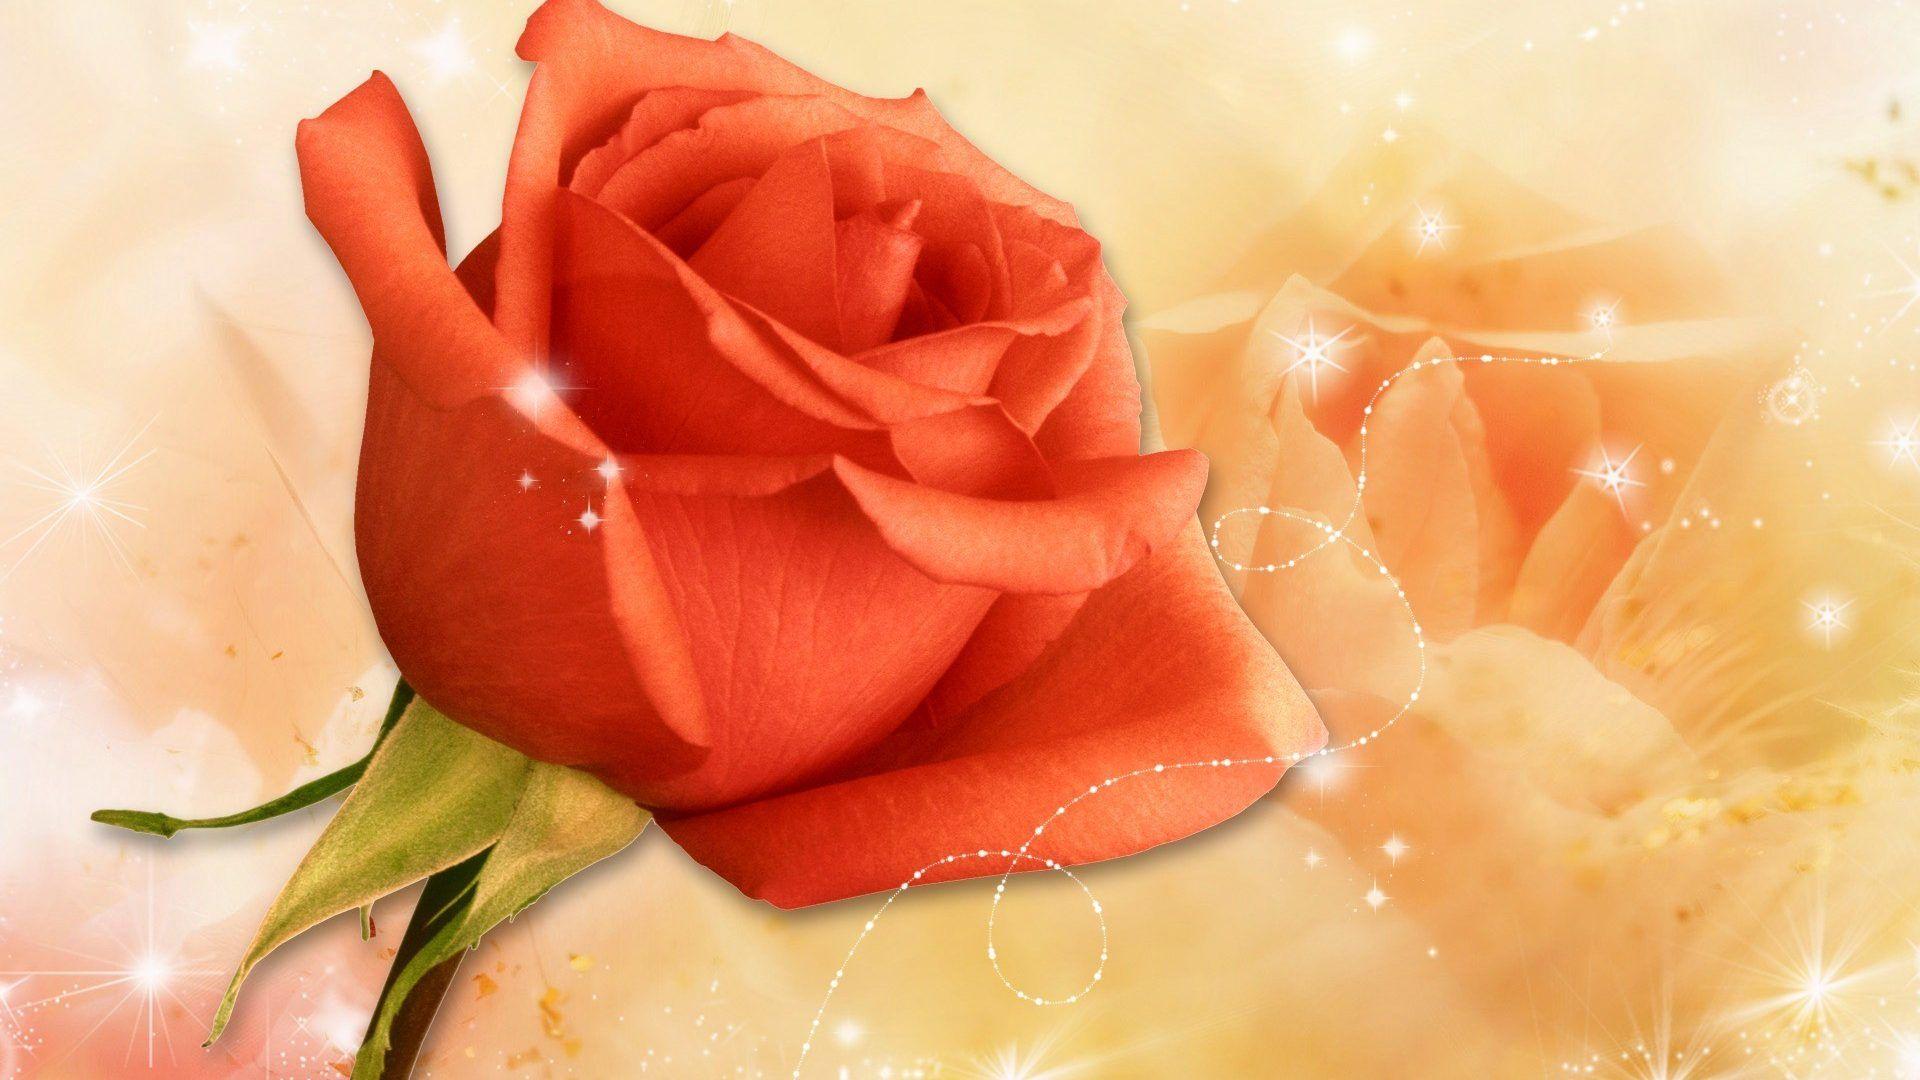 Rose Hd wallpaper by SupeR__Soul - Download on ZEDGE™ | eac5